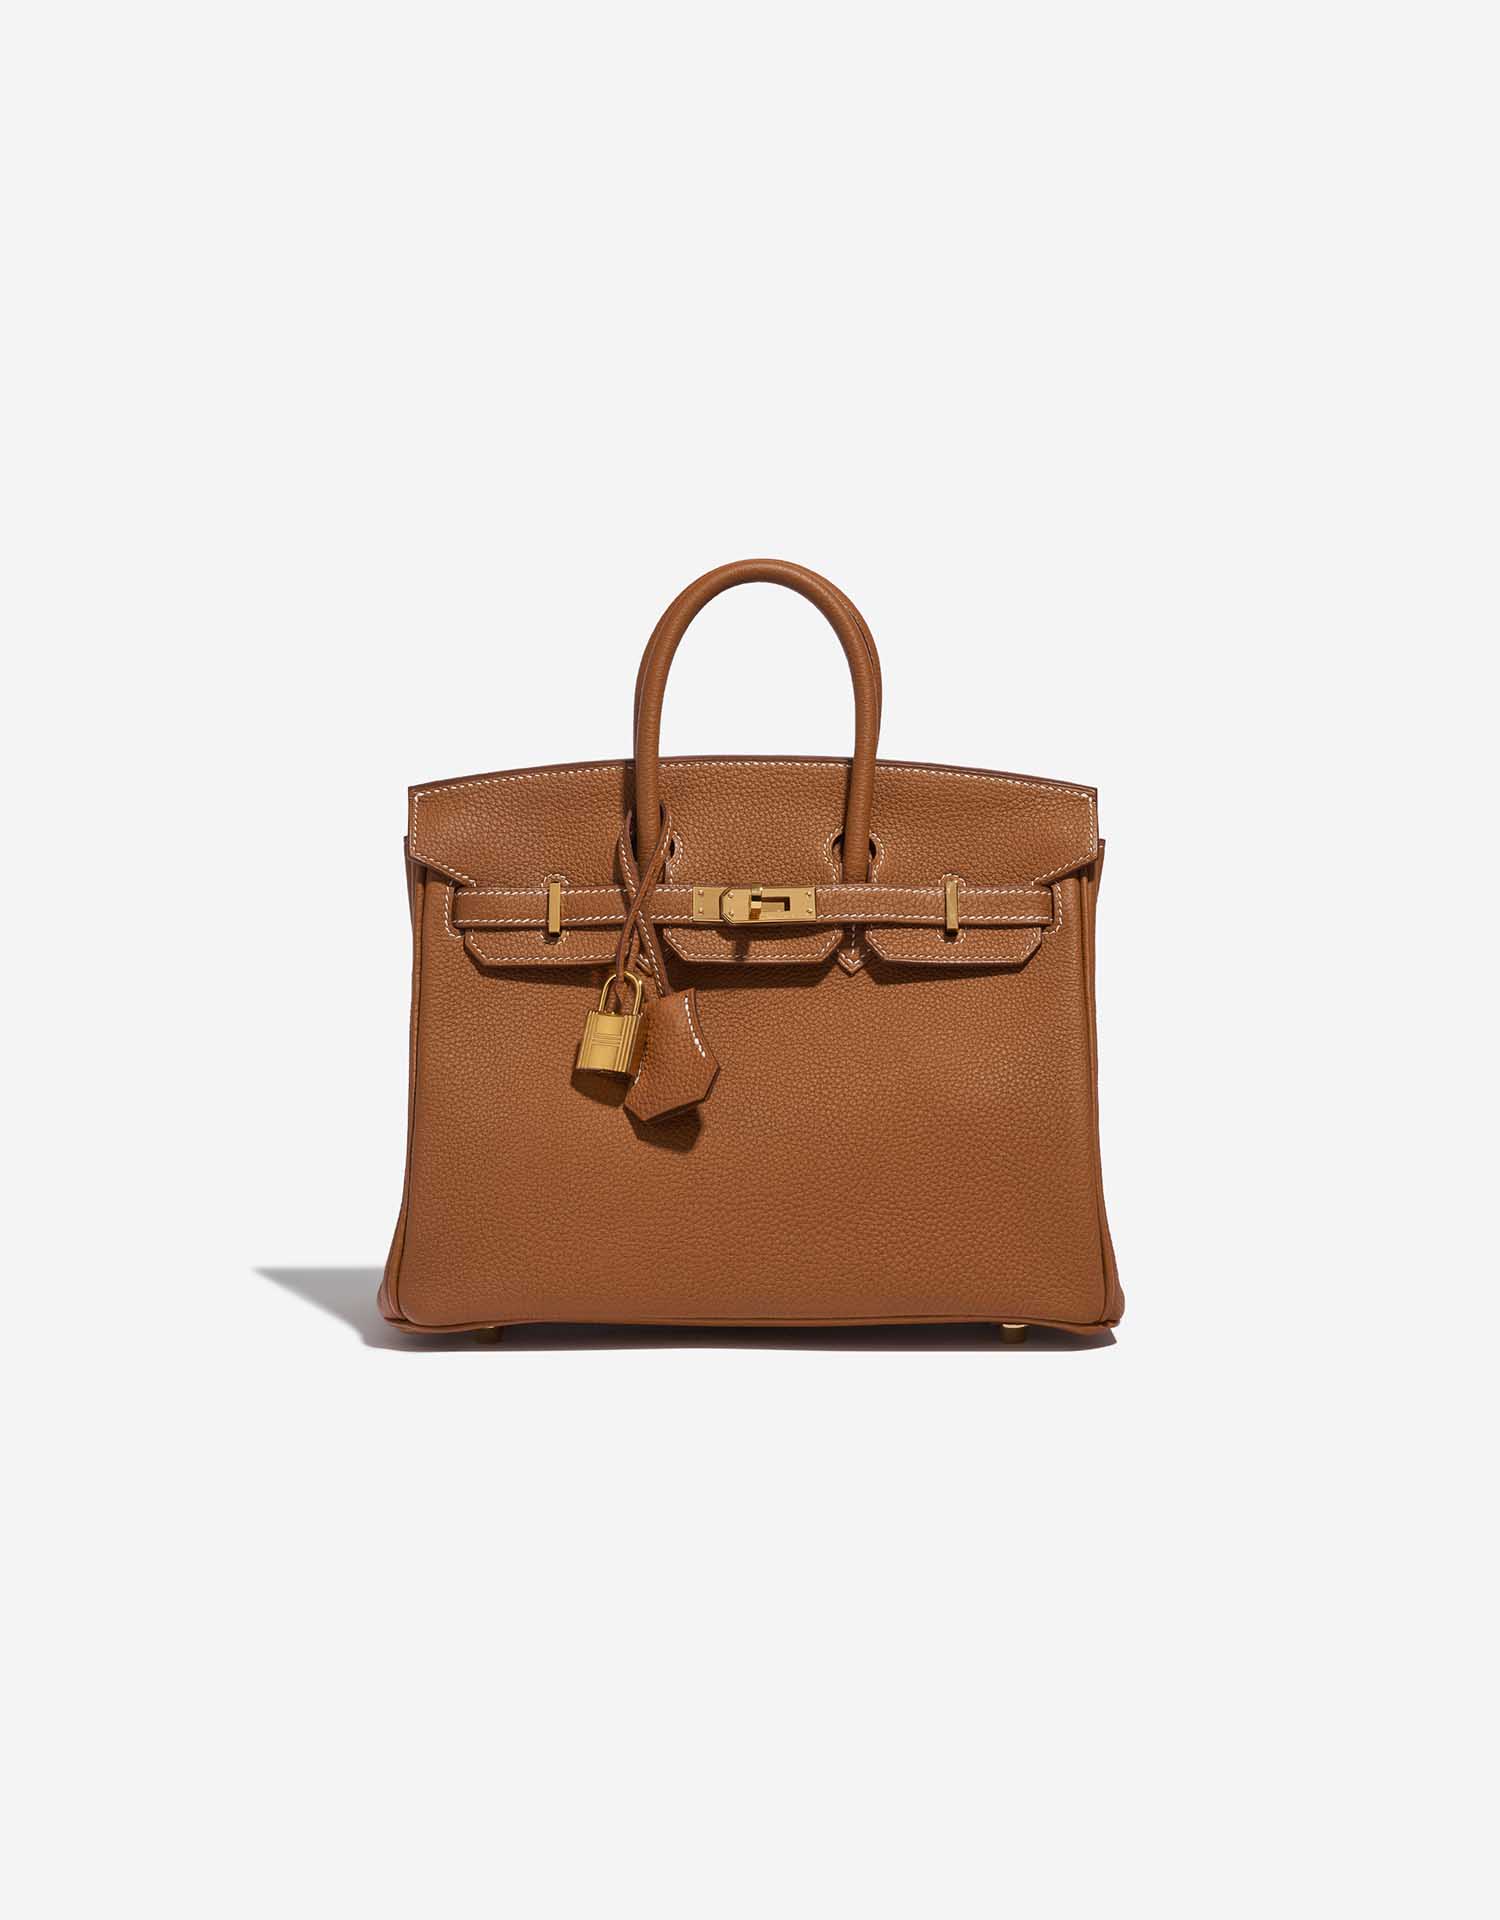 HERMES SAC Birkin Touch 25 Veau Togo Bag for sale at auction on 13th  October